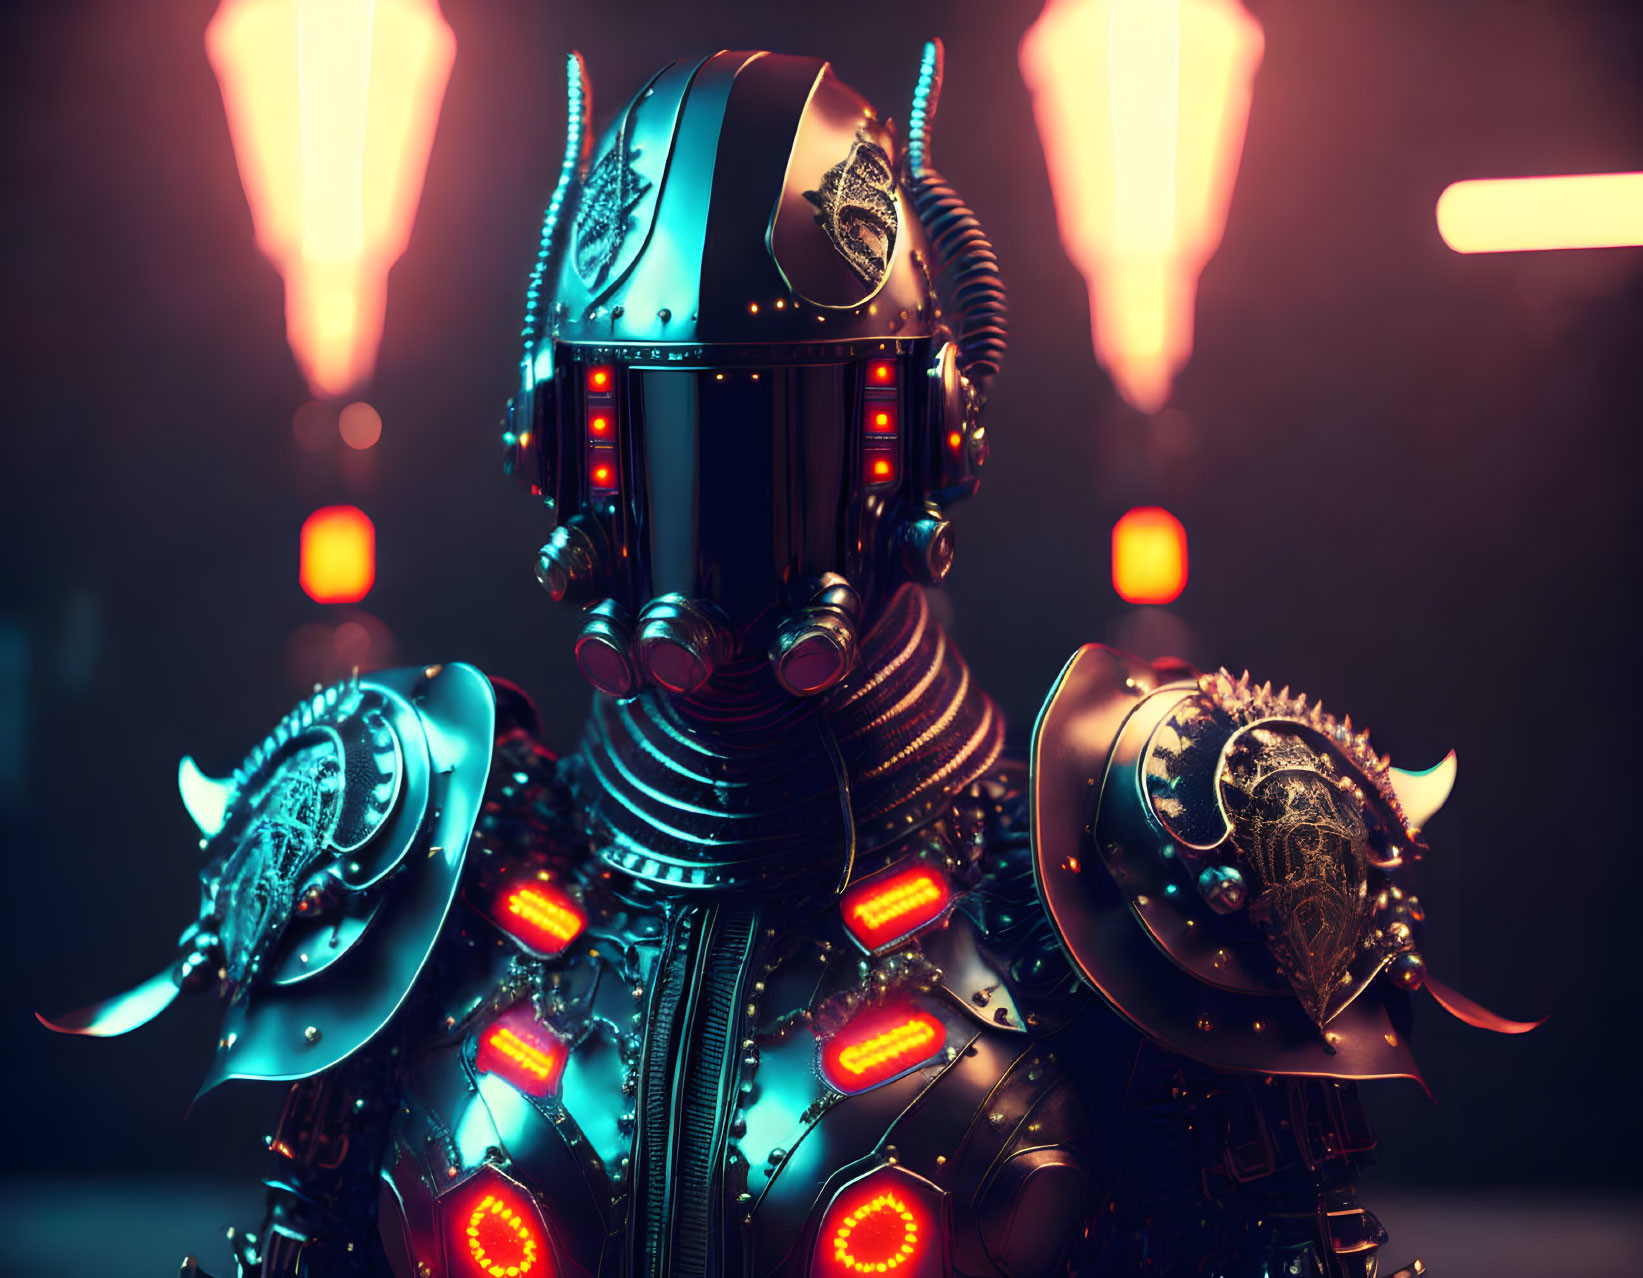 Futuristic robot with ornate armor and helmet illuminated by neon lights